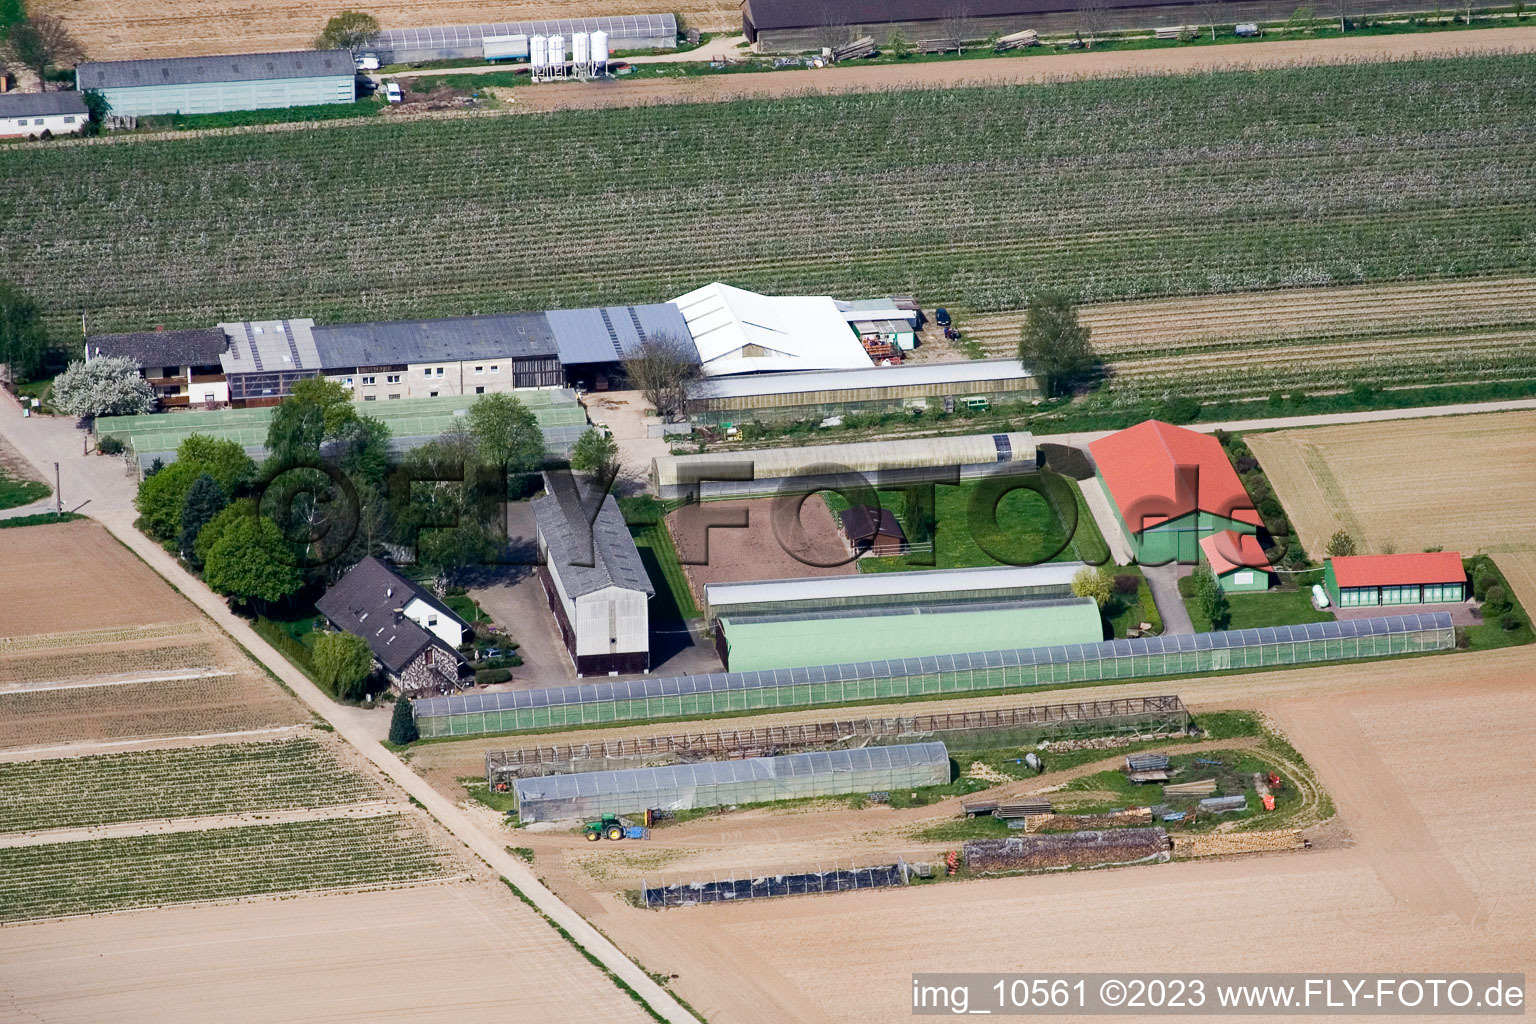 Aerial view of Zapf fruit farm in Kandel in the state Rhineland-Palatinate, Germany